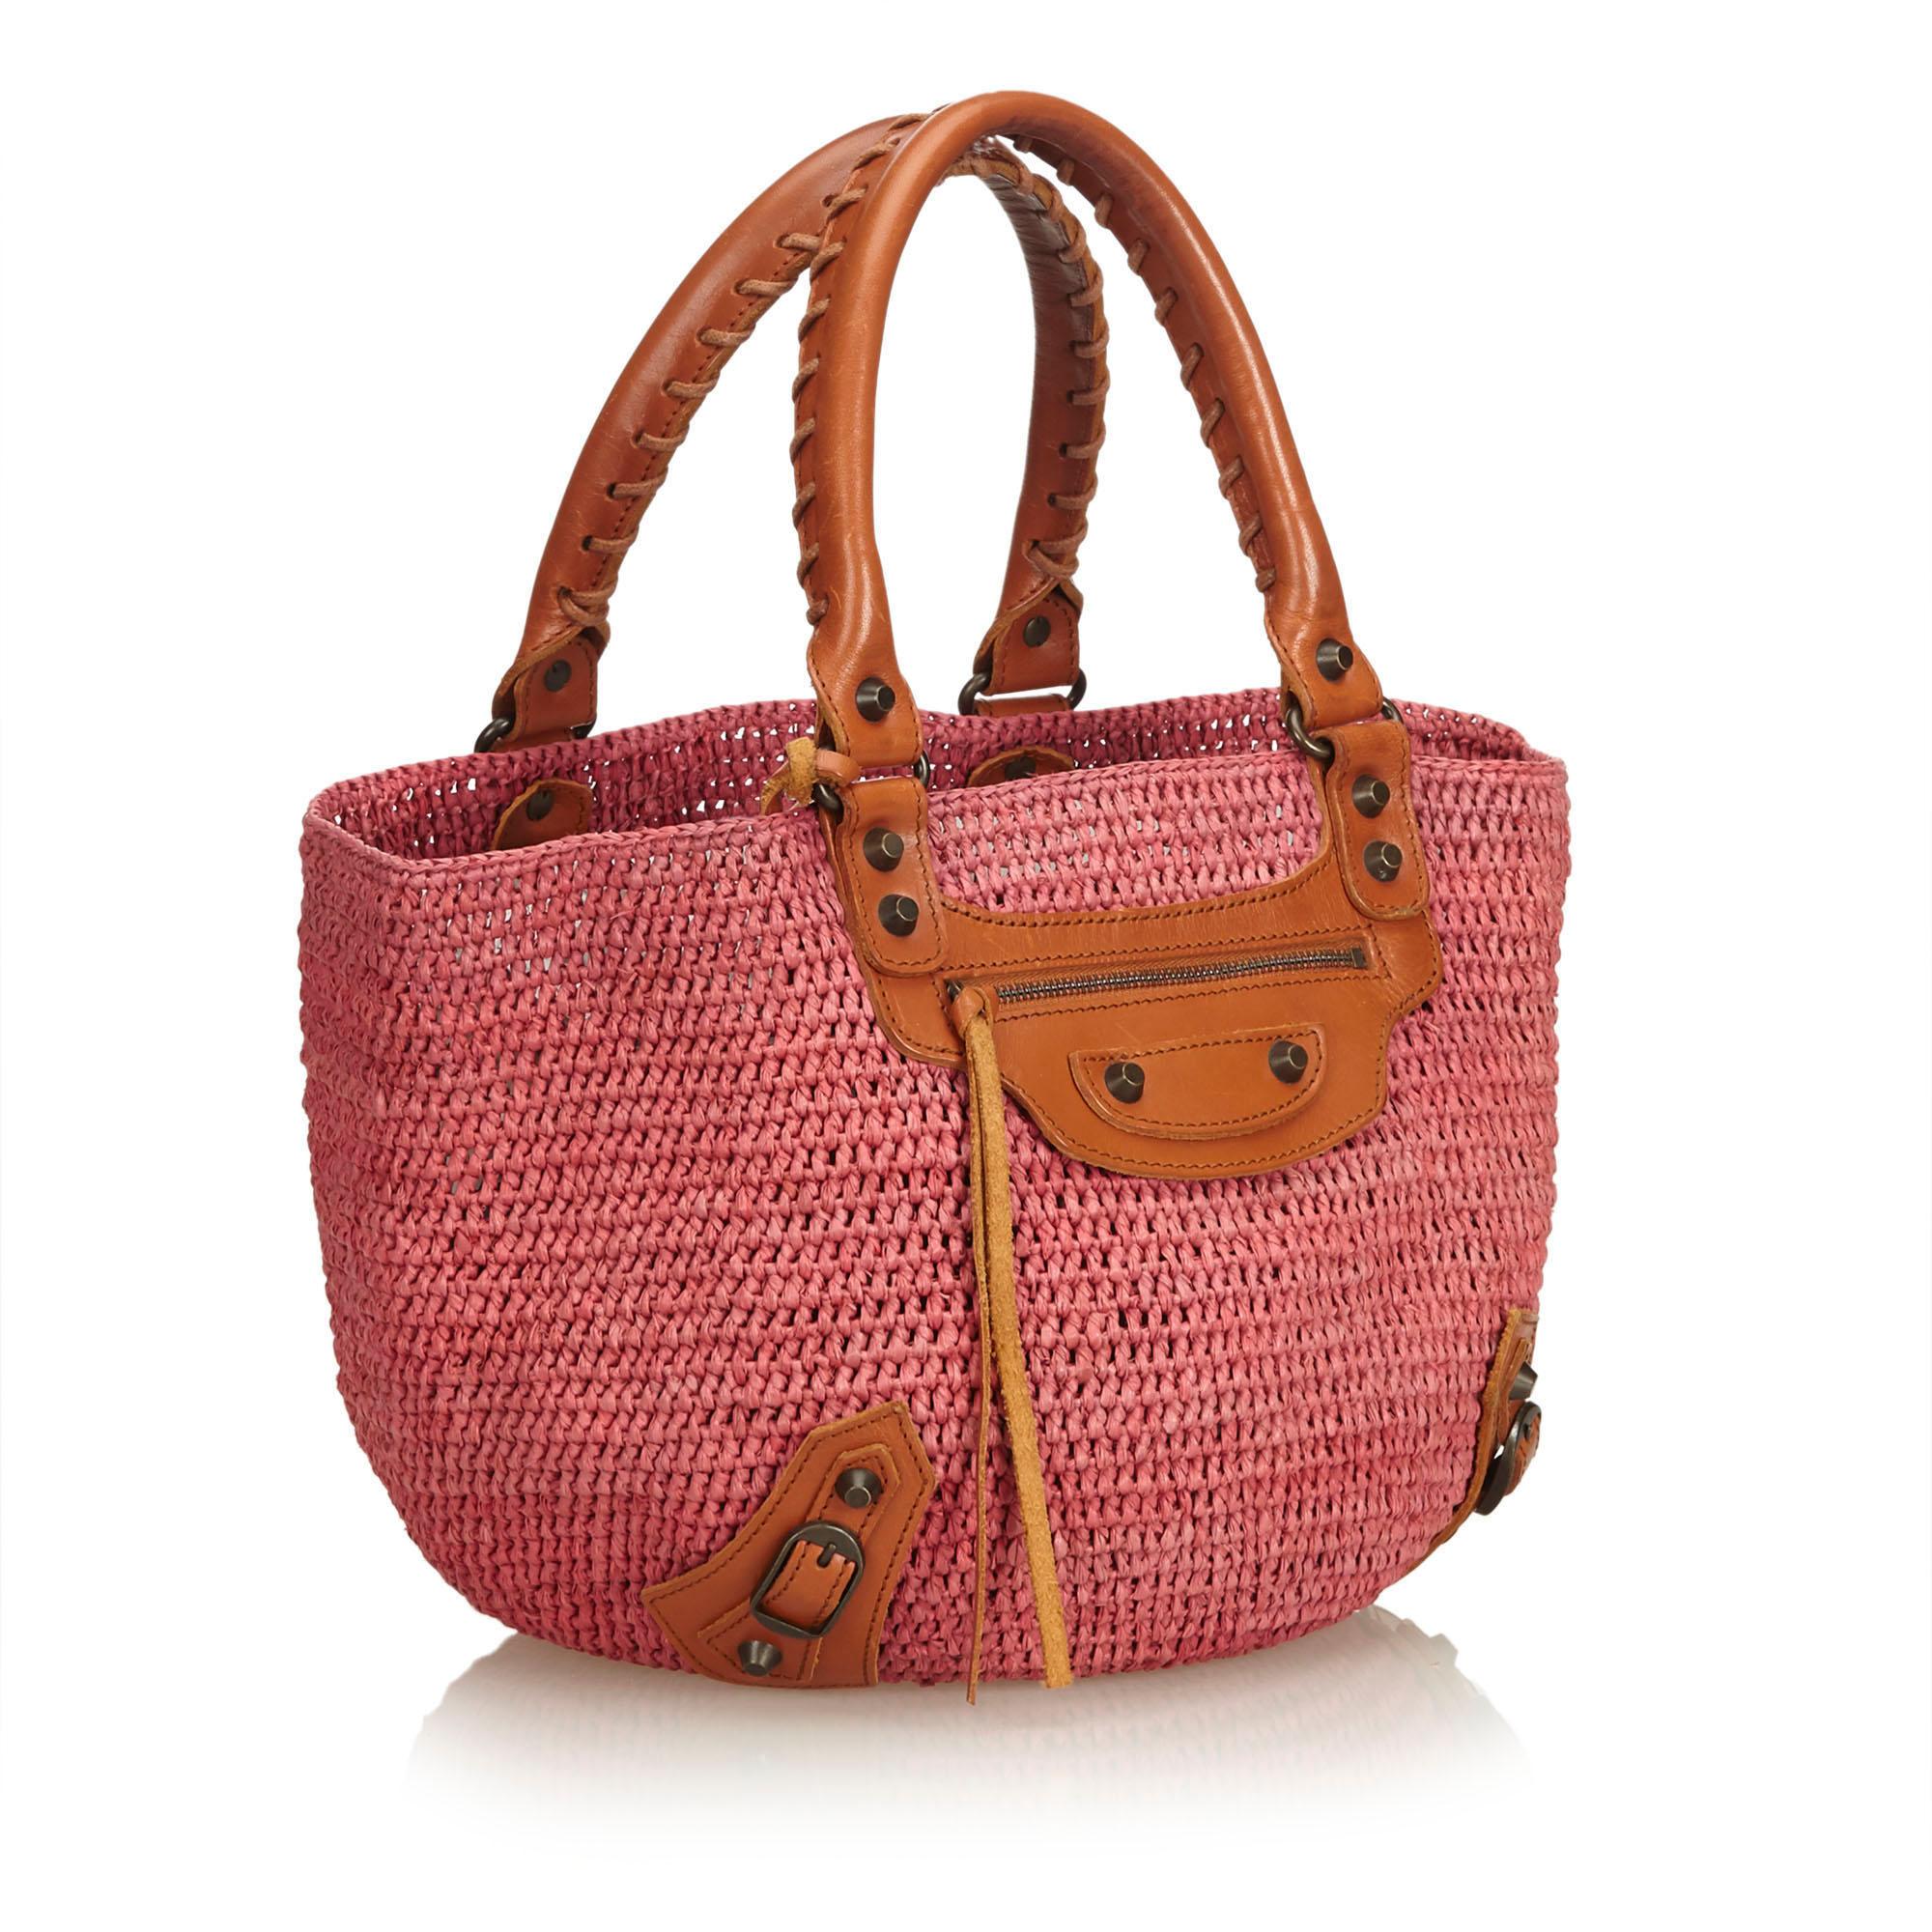 The Motocross Classic tote features a woven raffia body, rolled leather handles, open top, exterior zip pocket with a tassel zipper pull, and interior slip pockets. It carries as B+ condition rating.

Inclusions: 
This item does not come with